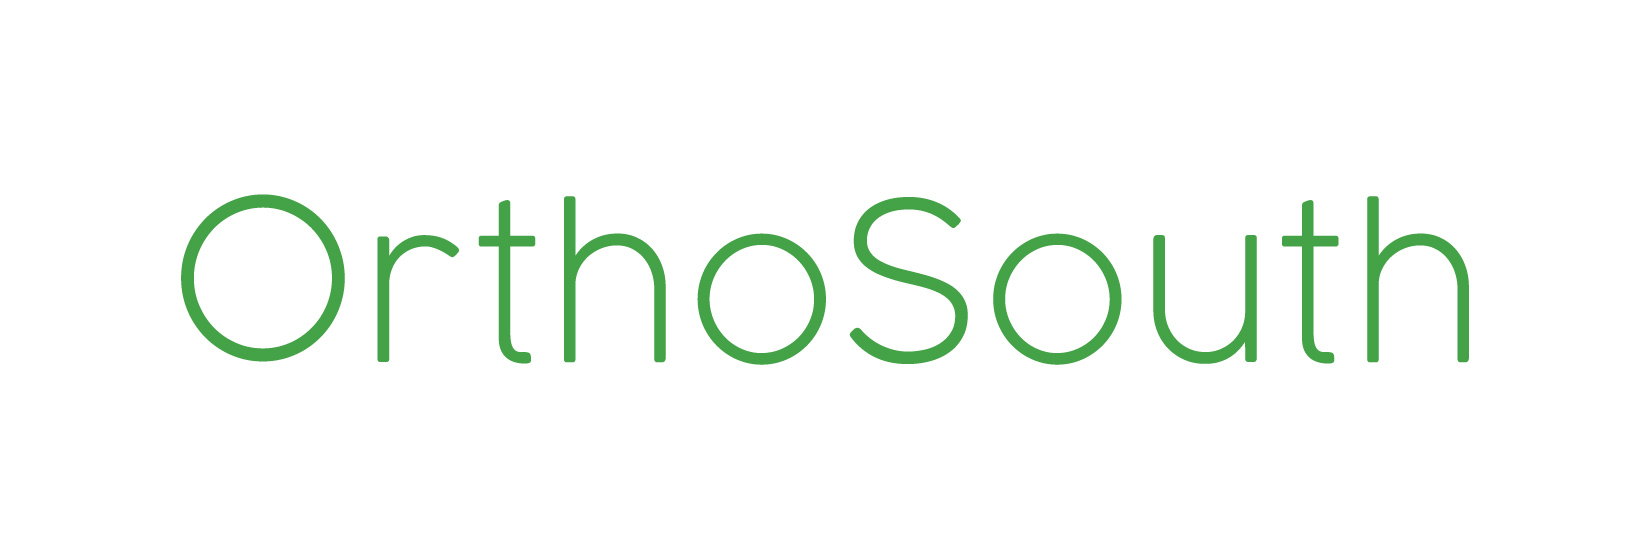 OrthoSouth-Logo-Color THIN-01.jpg